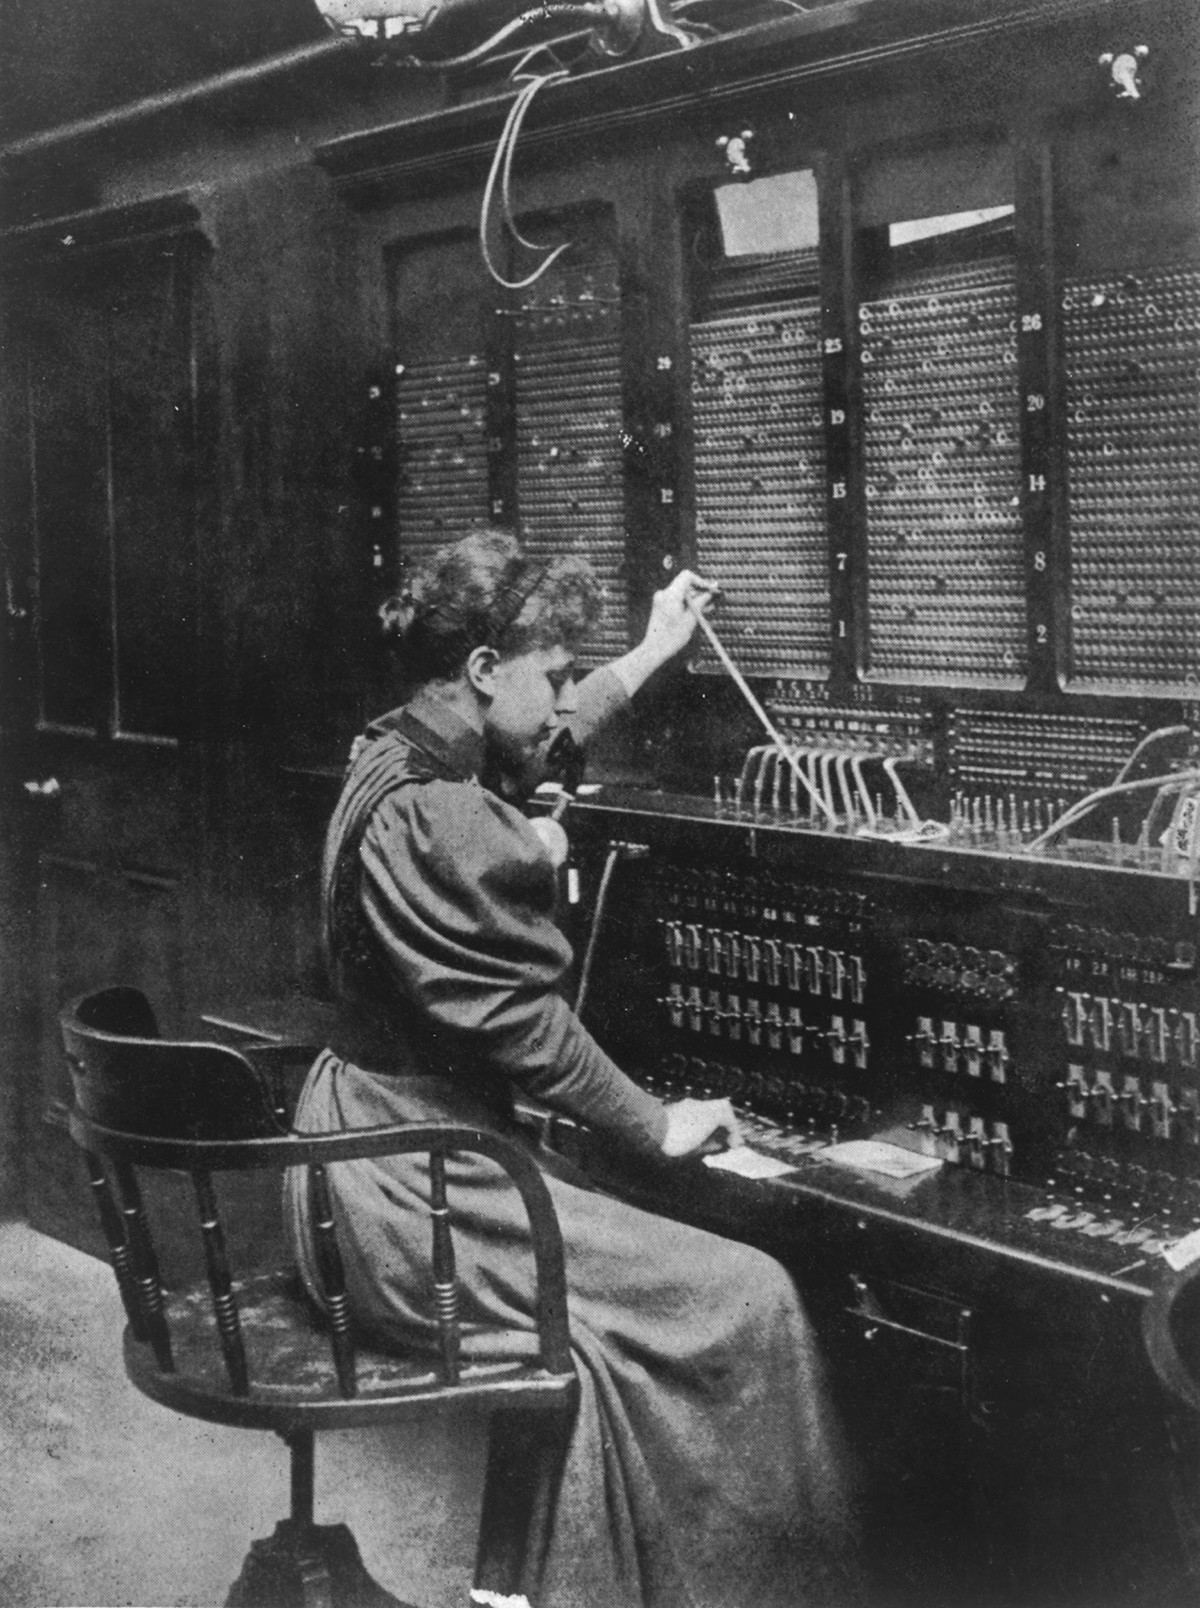 The routine of a telephone operator